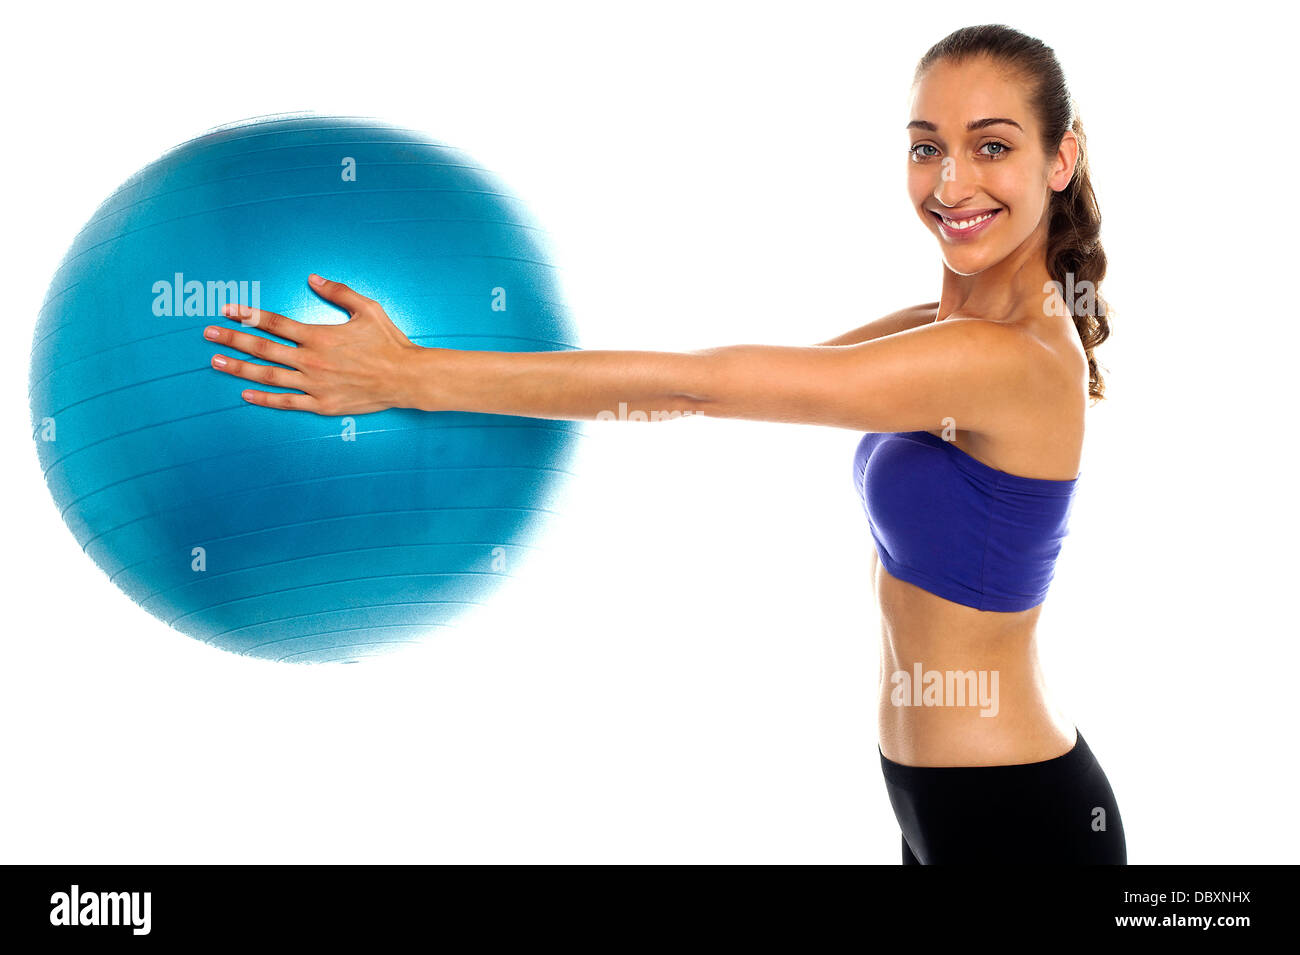 Fitness enthusiast holding a swiss ball Stock Photo